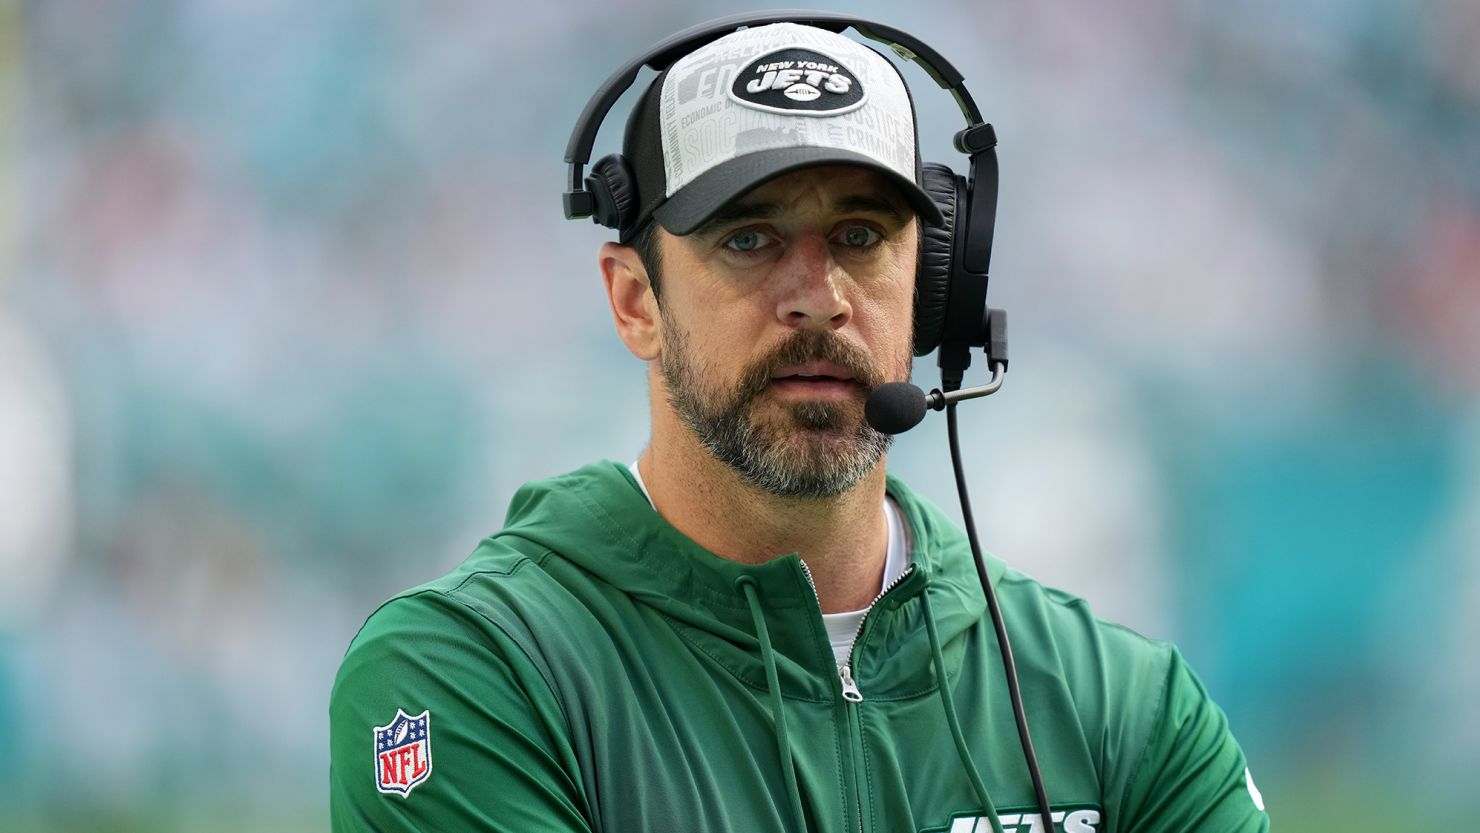 Jets Draft Strategy Focuses on Protecting Aaron Rodgers Amid High Stakes